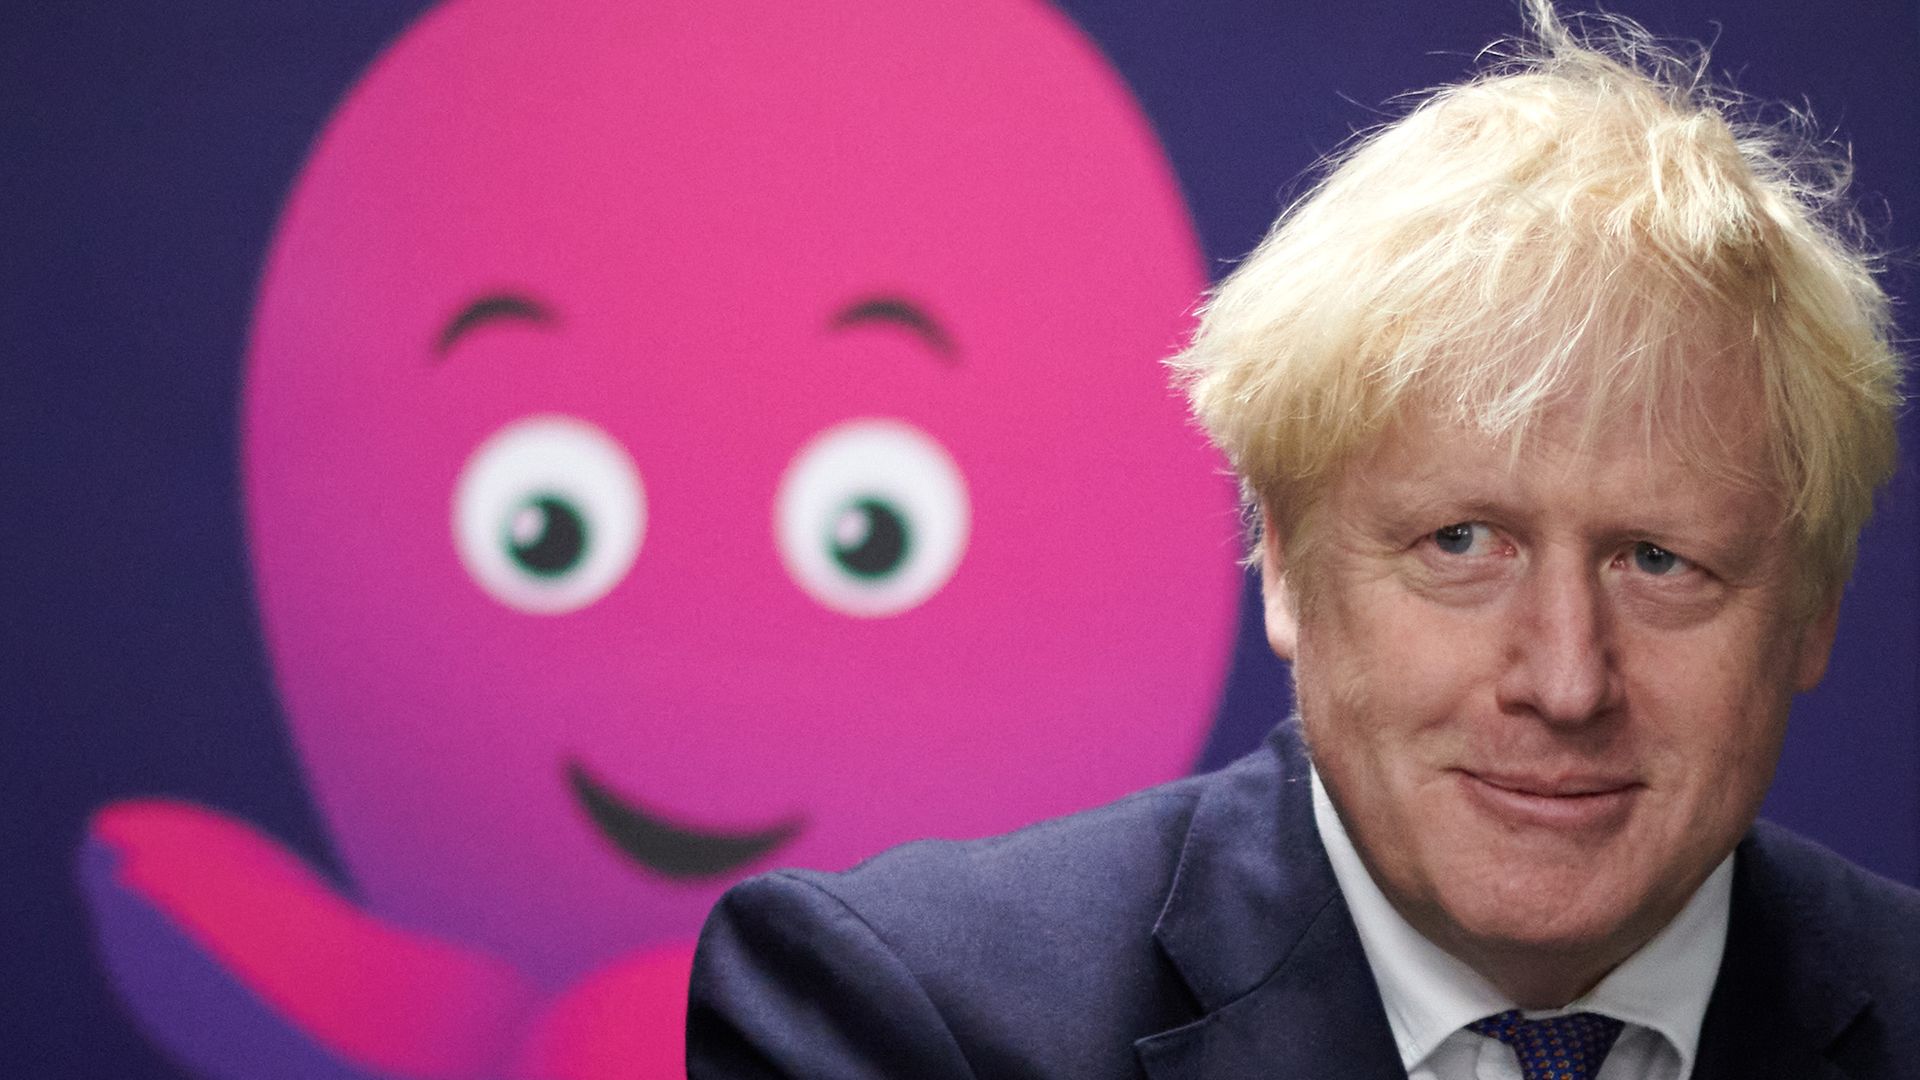 Prime Minister Boris Johnson during a visit to the headquarters of Octopus Energy in London - Credit: PA